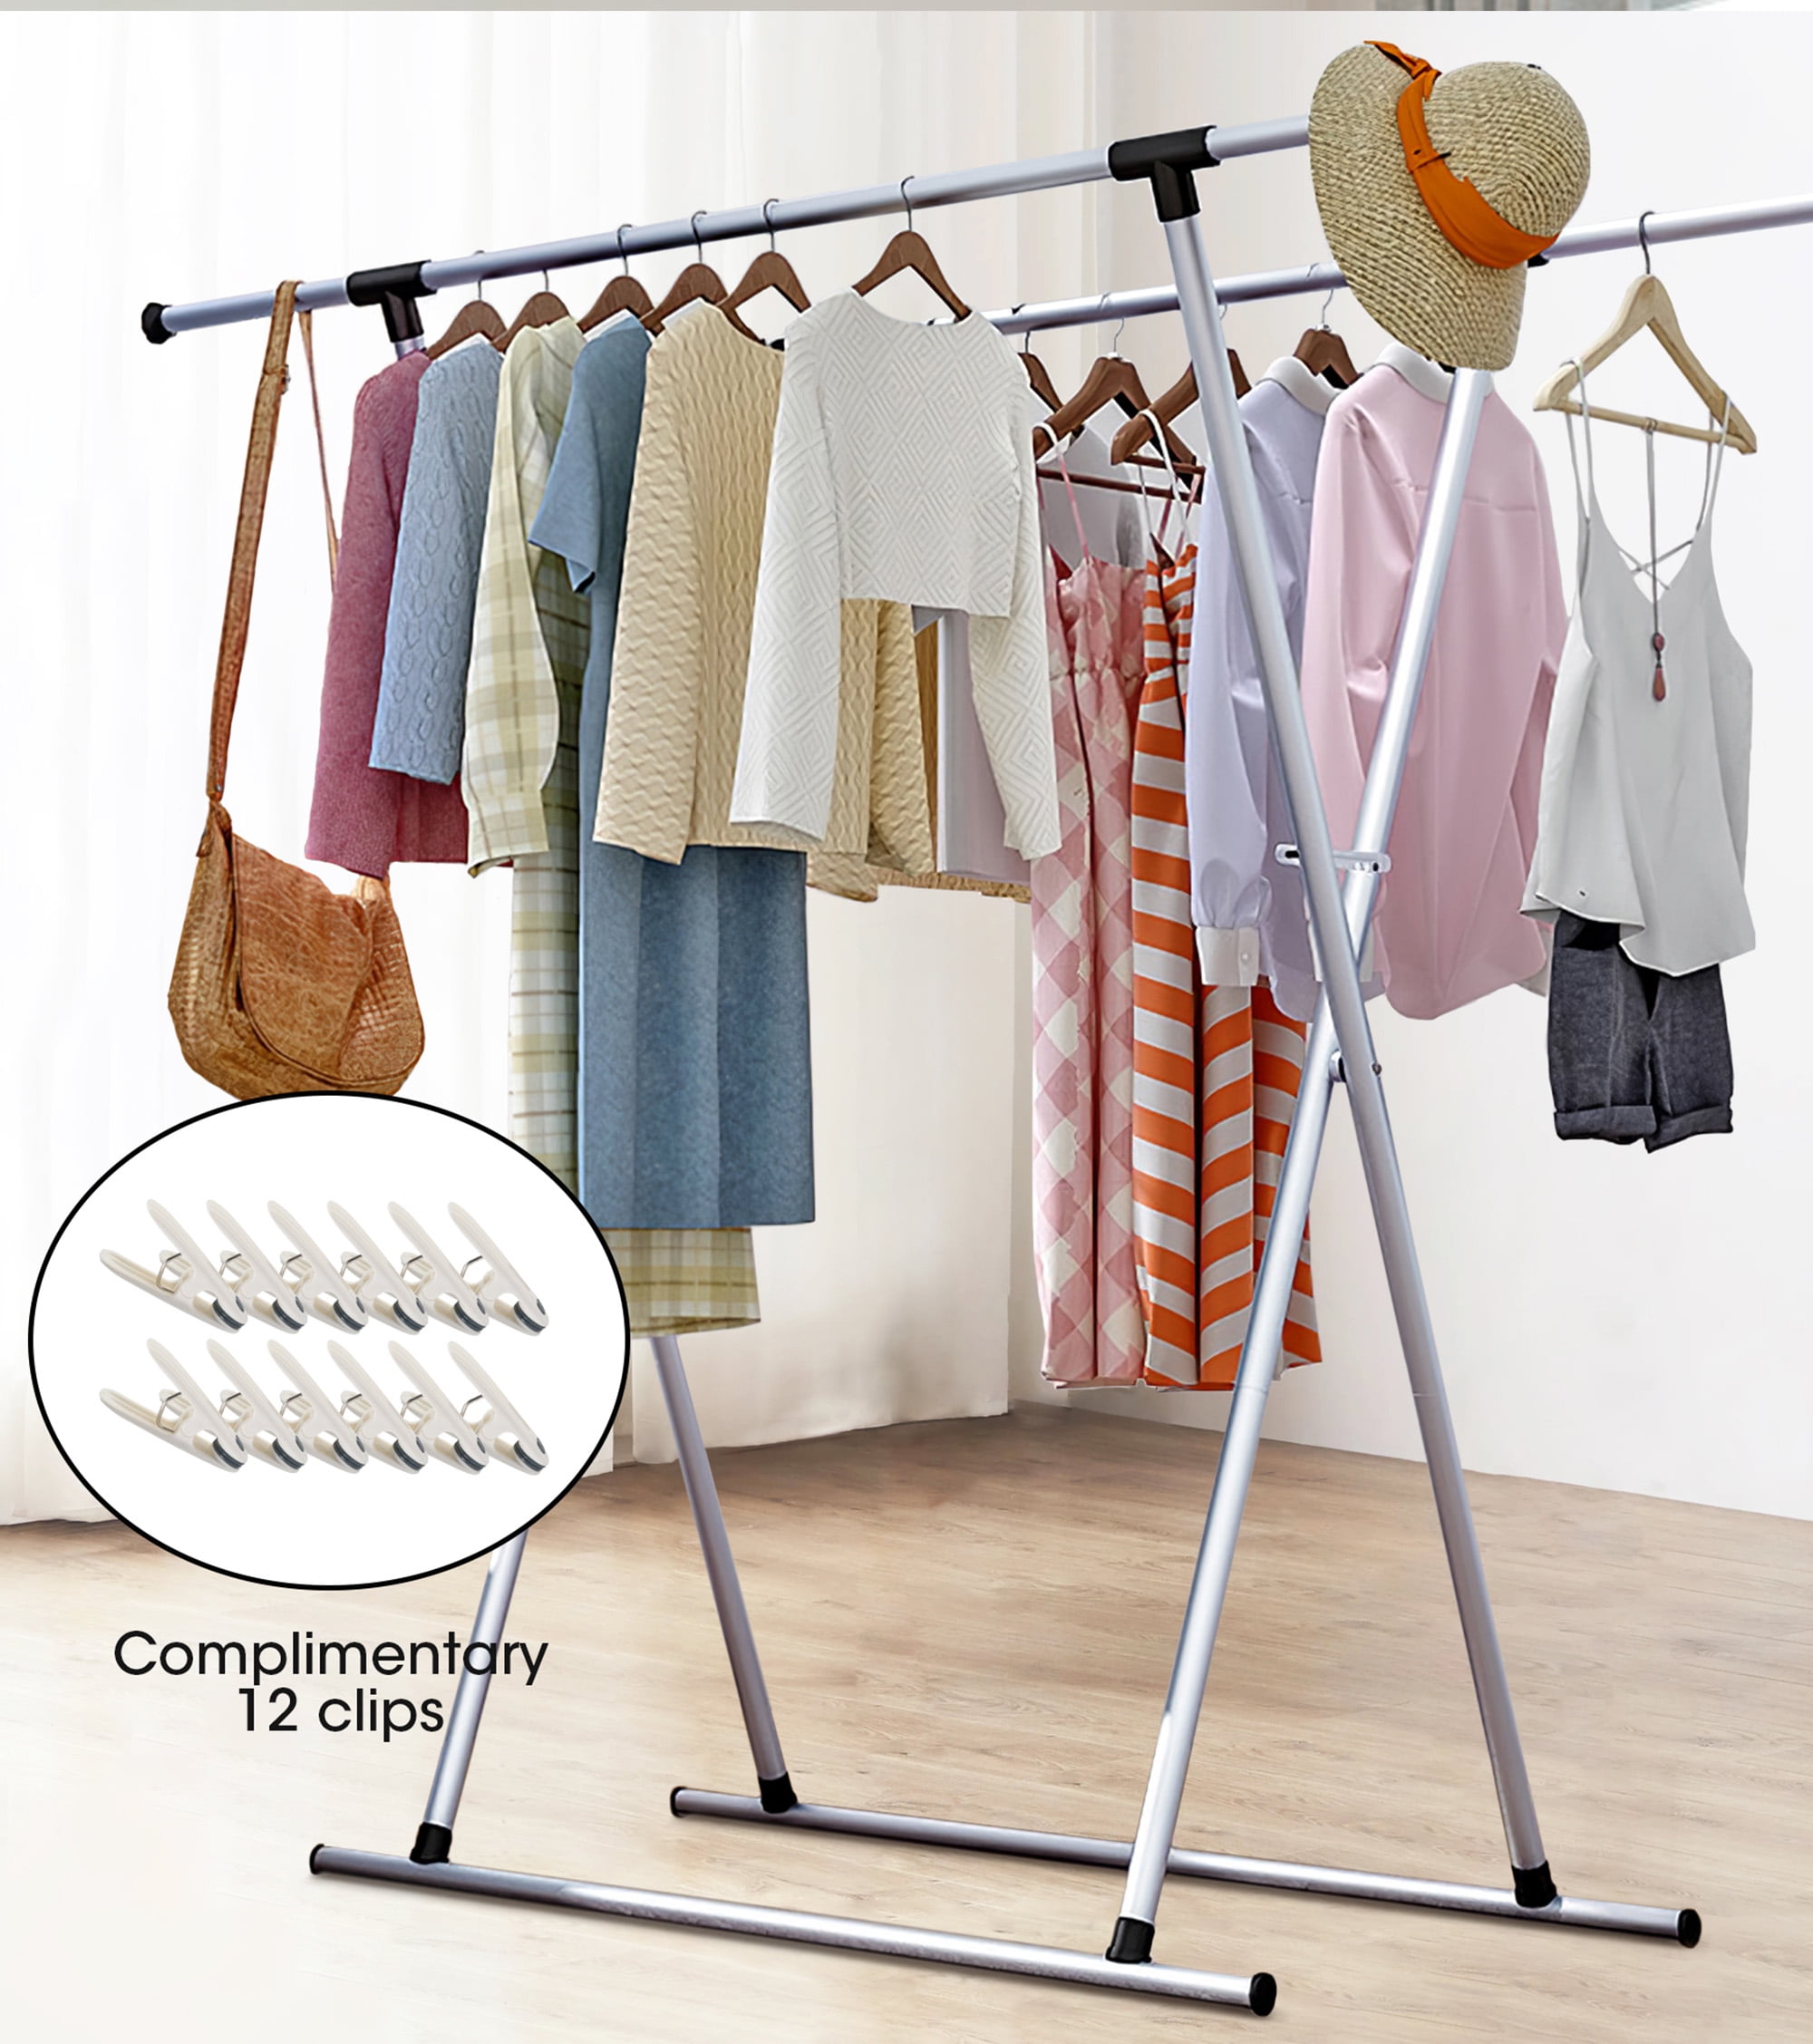 RELOIVE Metal Clothes Drying Rack,Foldable Laundry Coat Hanger with ...